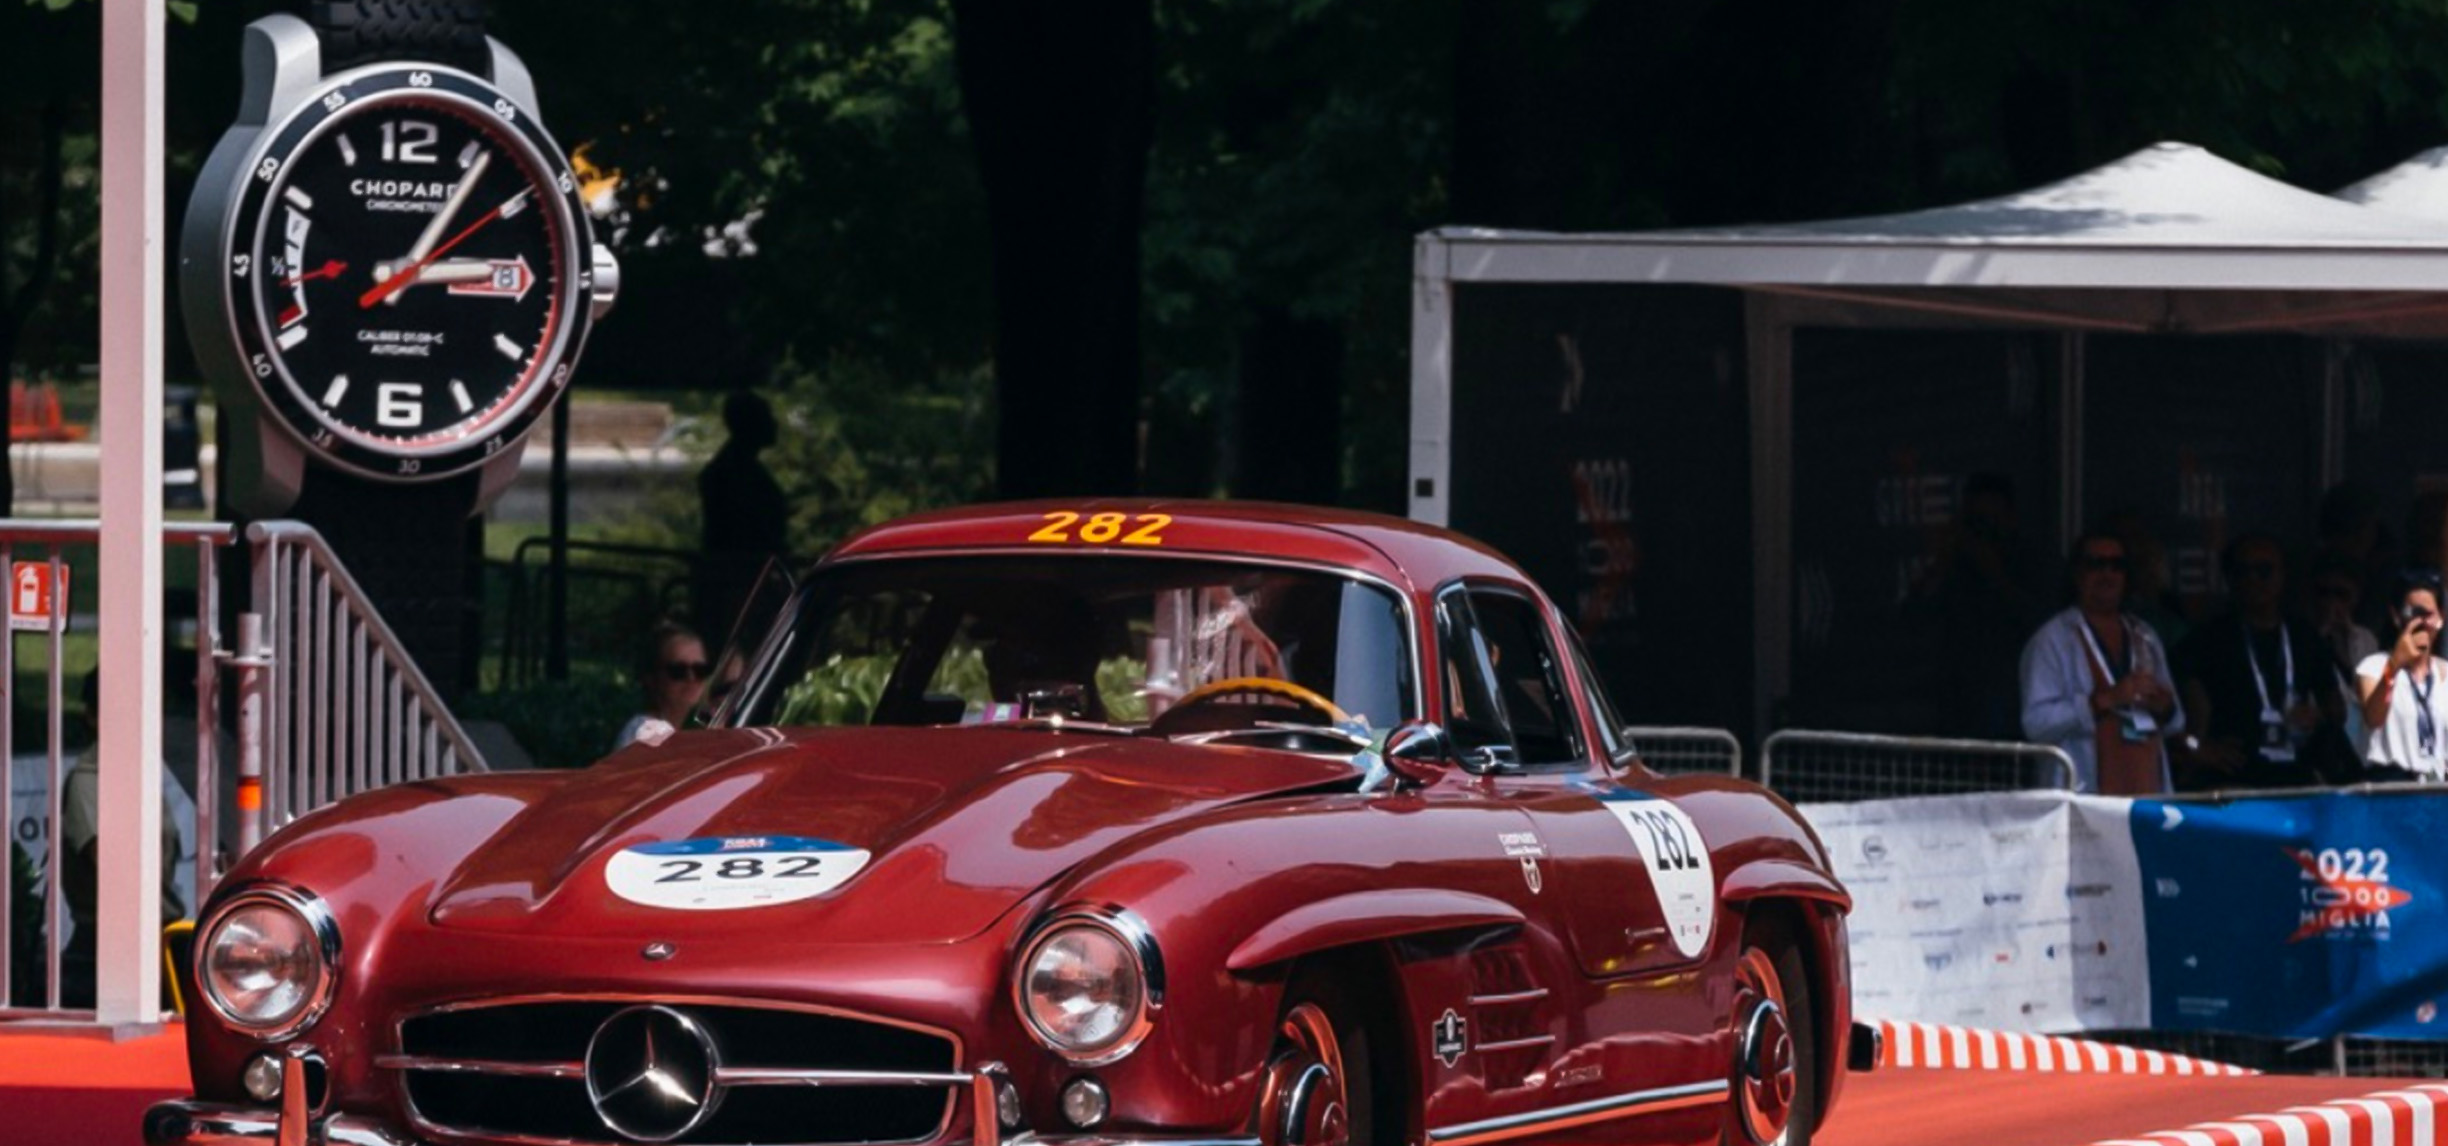 Celebrating The Eternal Affair Of Horology And Motorsports – Chopard Mille Miglia